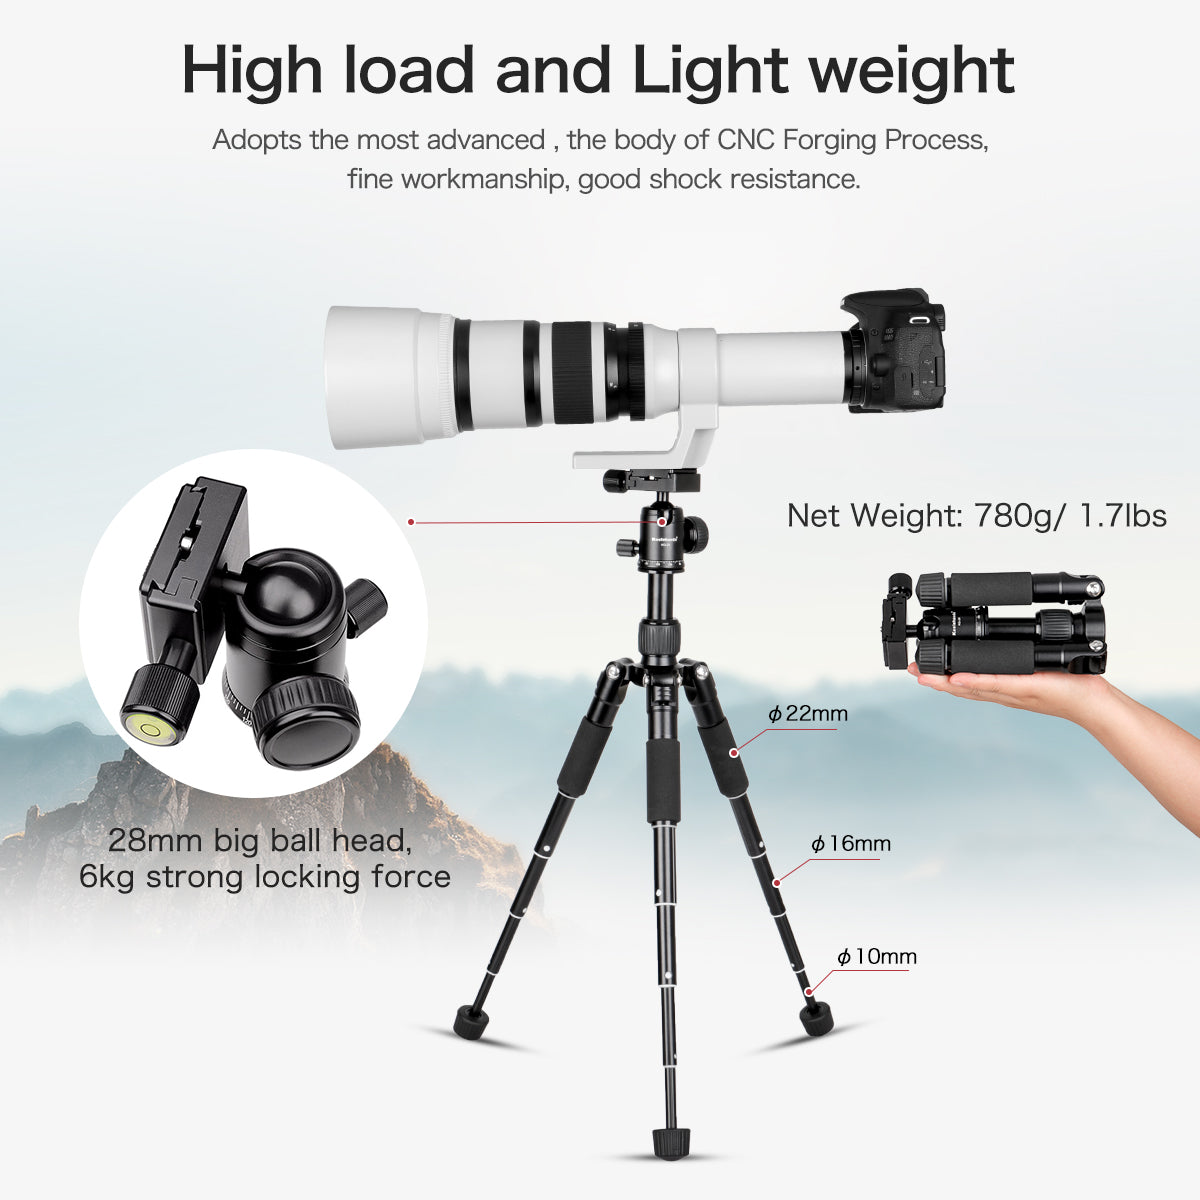 Portable Mini Tripod Aluminum Alloy Tabletop Tripod Height 20 inch / 51cm with 360 Degree Ball Head and Bag for DSLR Camera, Video Camcorder.Load up to 11lbs / 5kg - (H-50 Black)